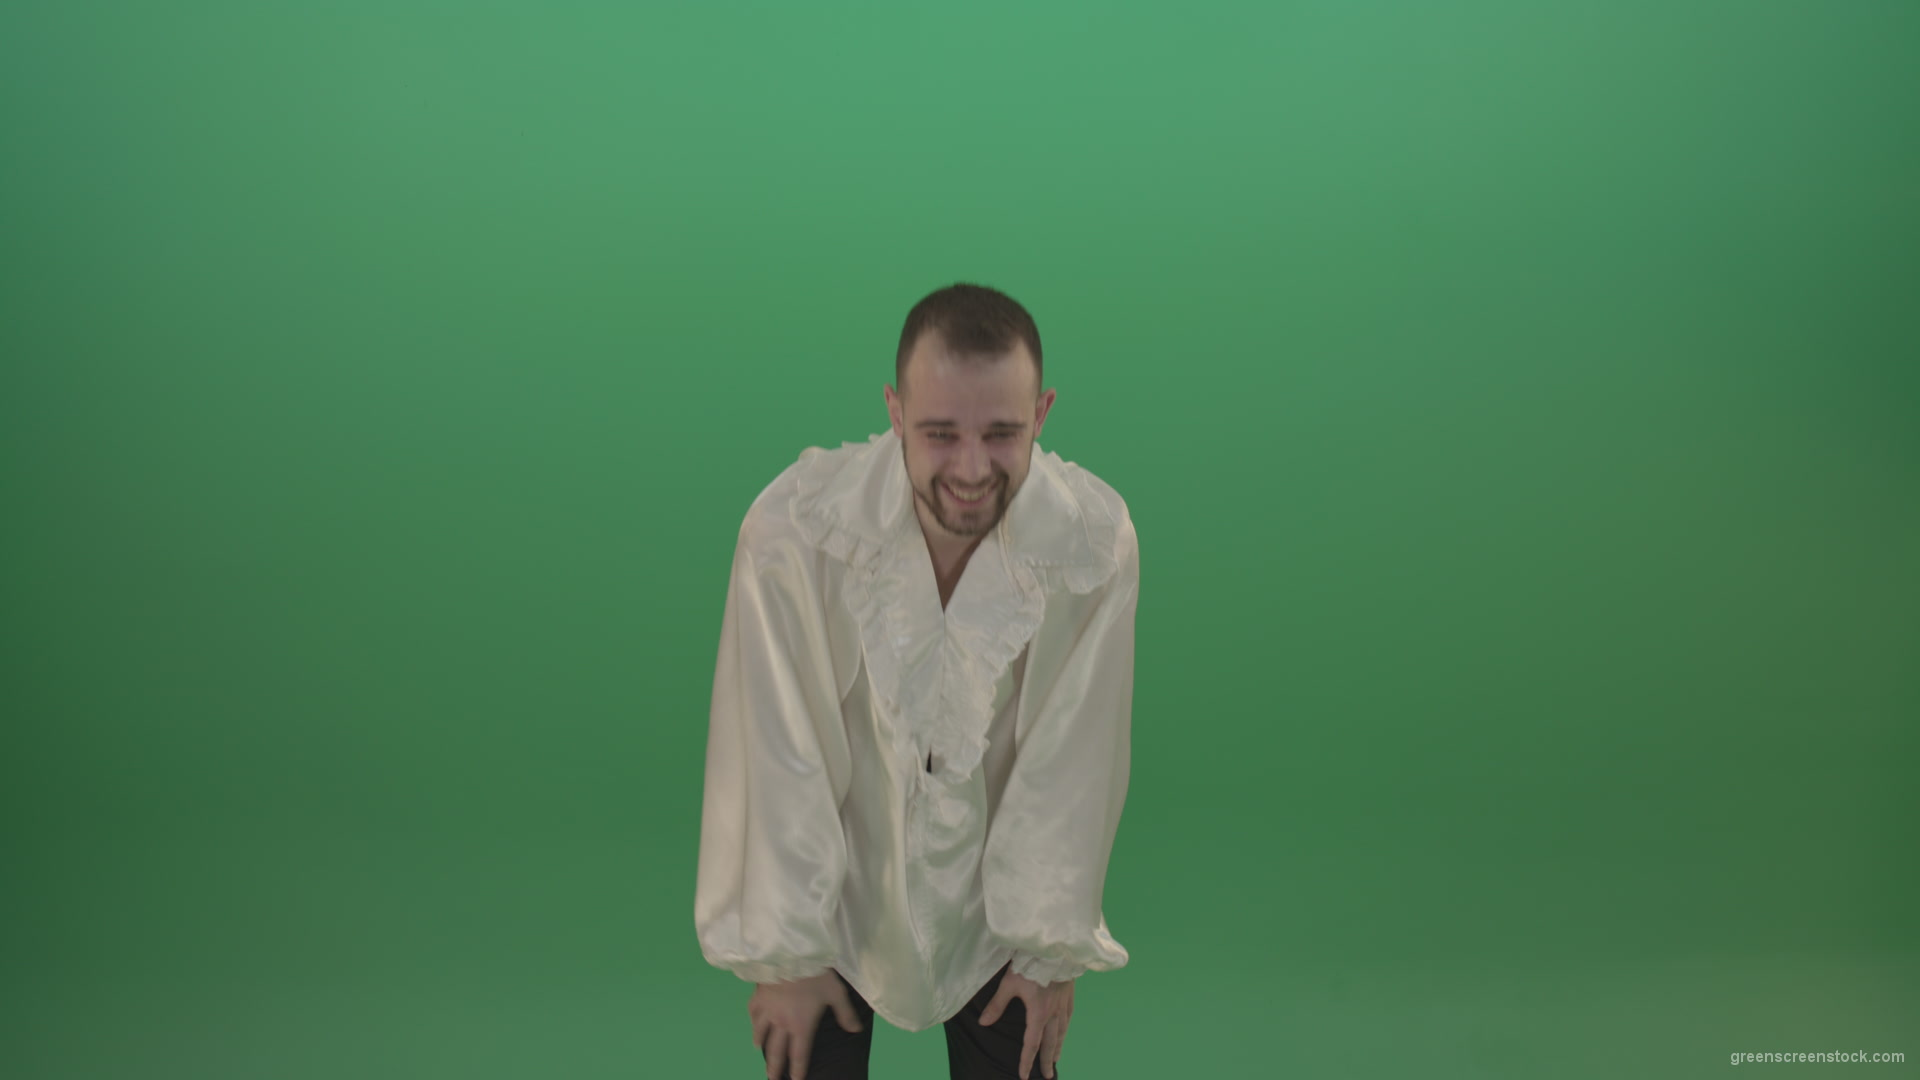 Scarry-laughing-from-the-professional-actor-in-white-shirt-isolated-on-green-screen-background_009 Green Screen Stock